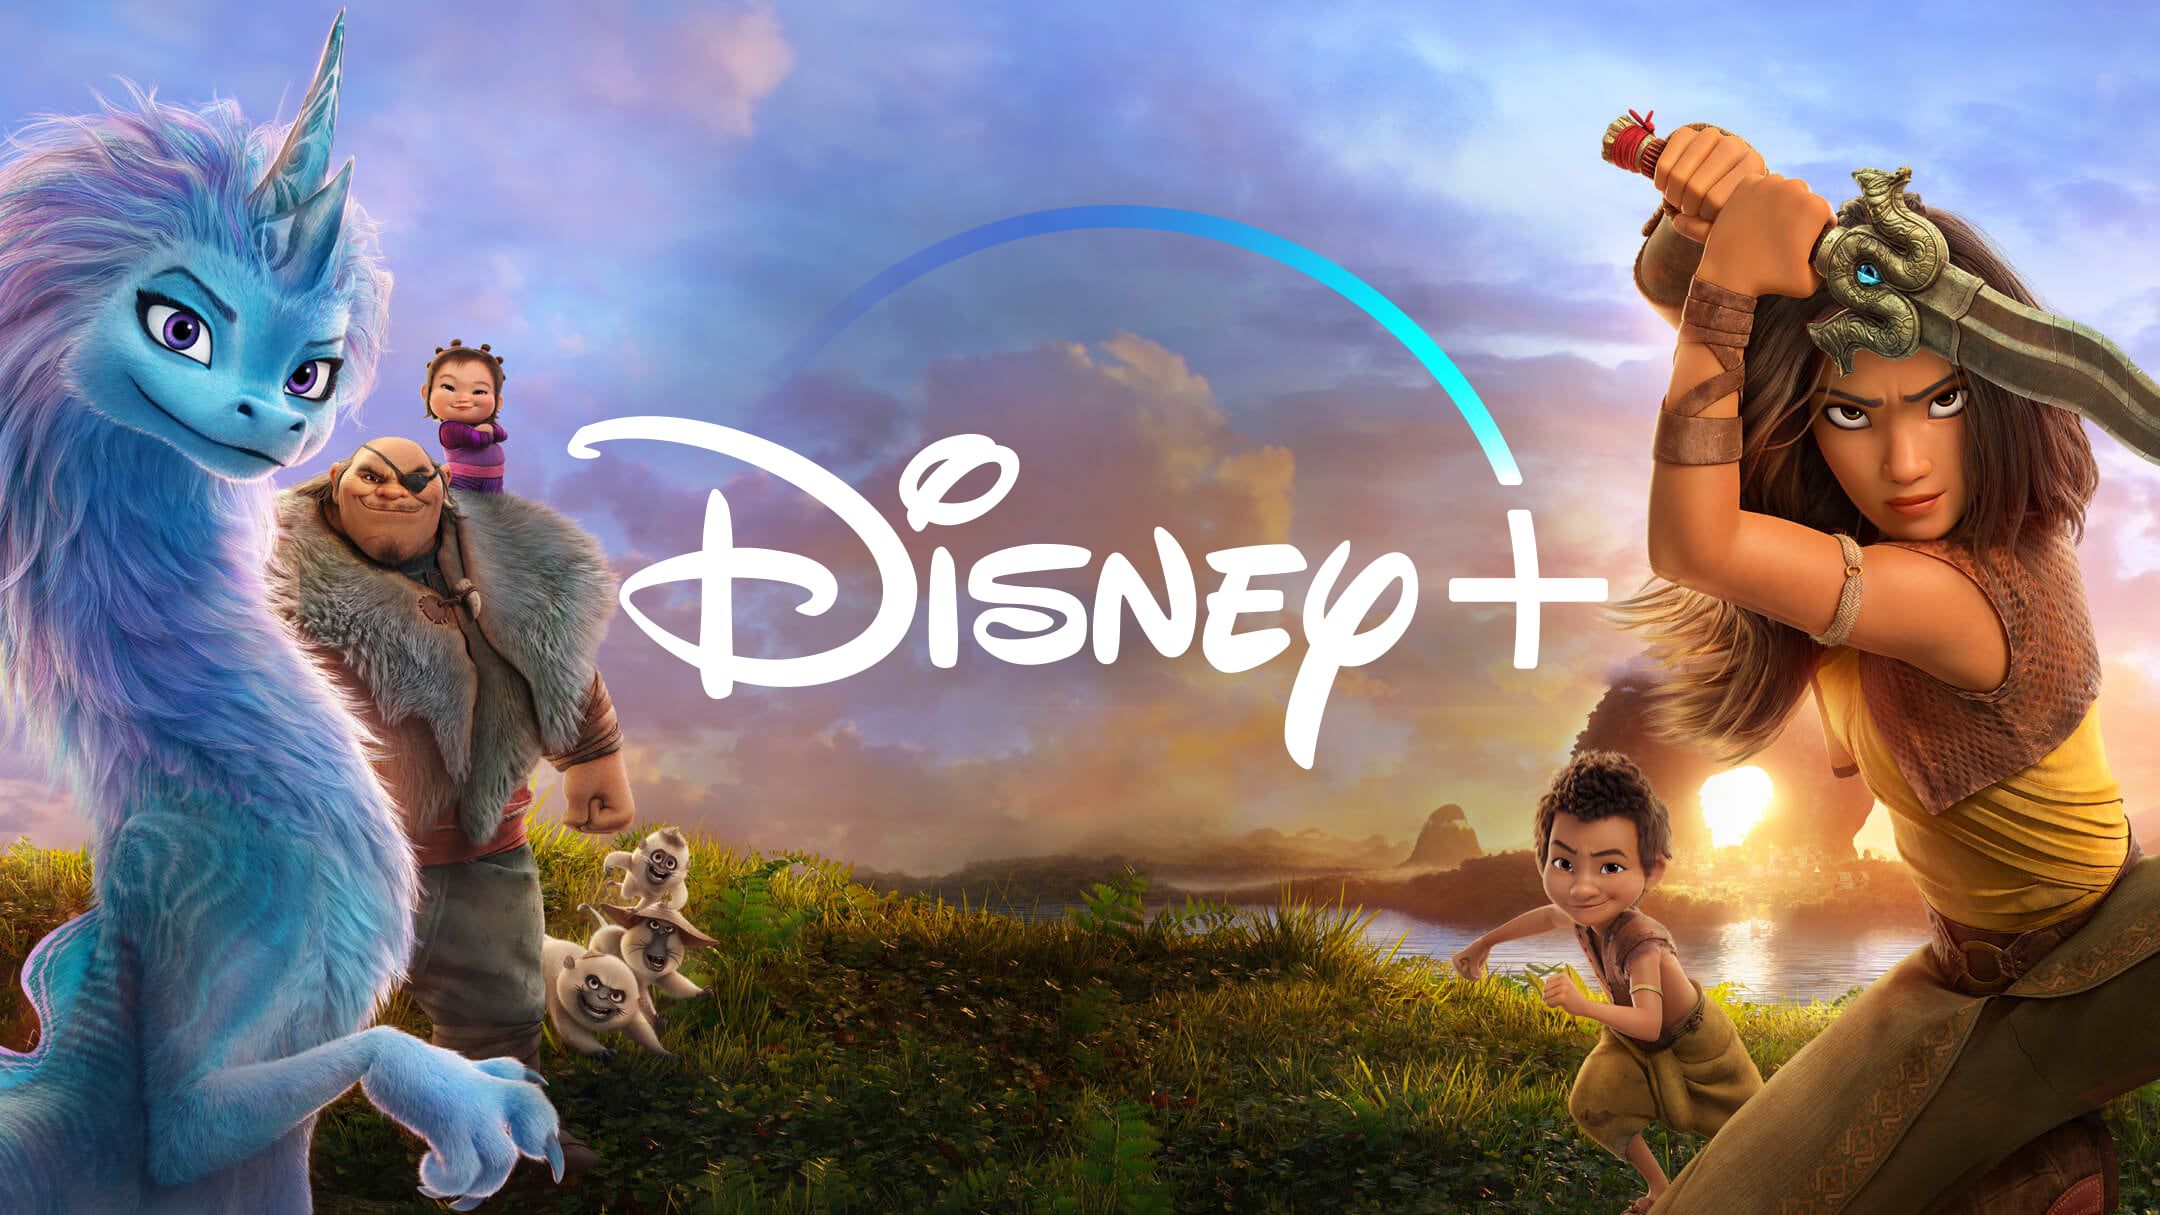 Disney Might Launch Cheaper, Ad-Supported Version of Disney+